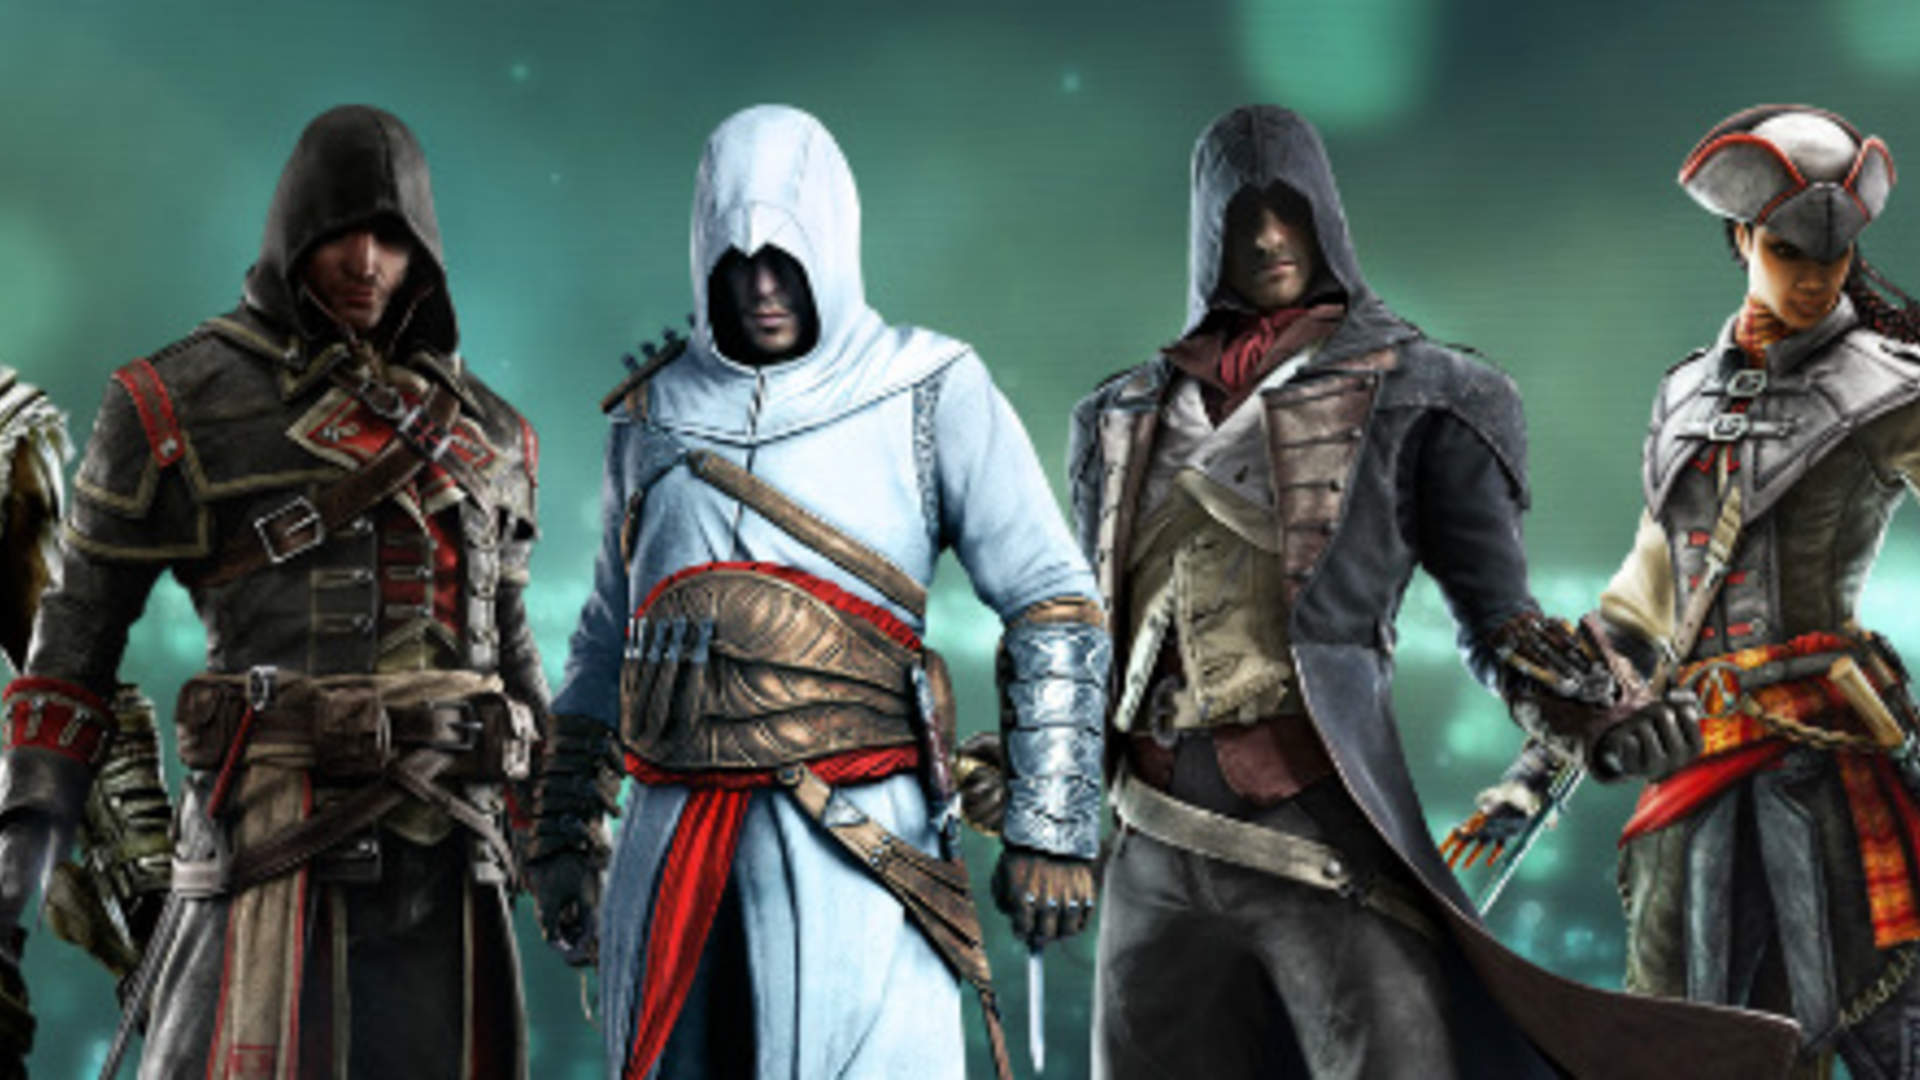 netflix-to-develop-live-action-assassin-s-creed-series-with-ubisoft